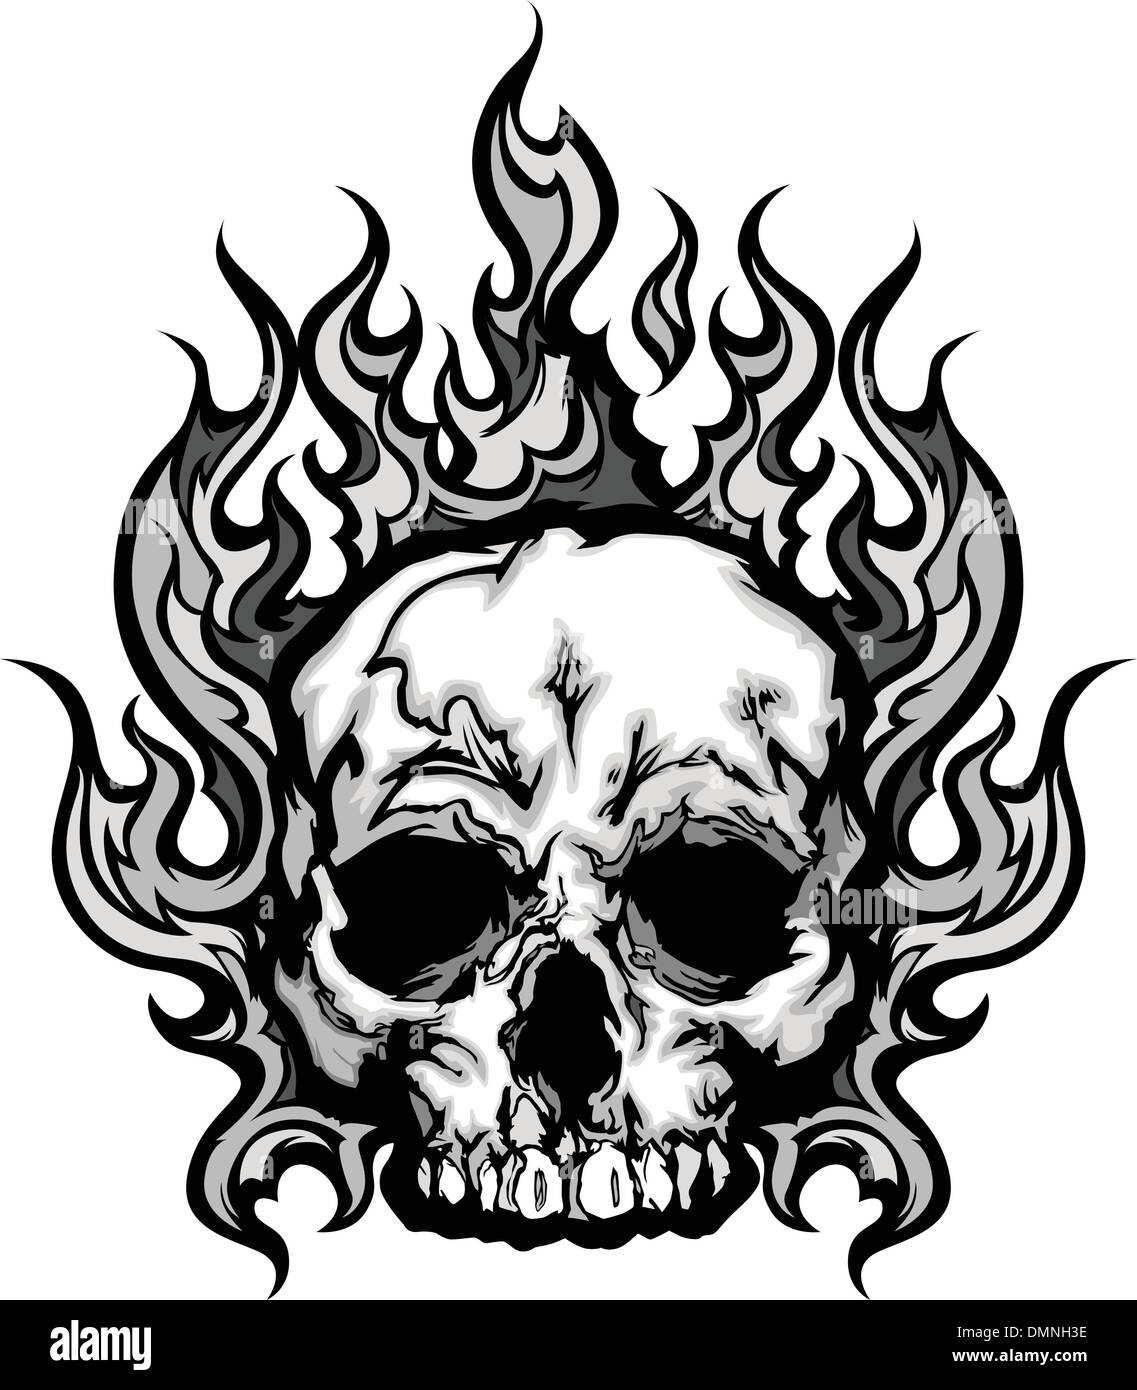 Fire  Flame Tattoo Images  Designs